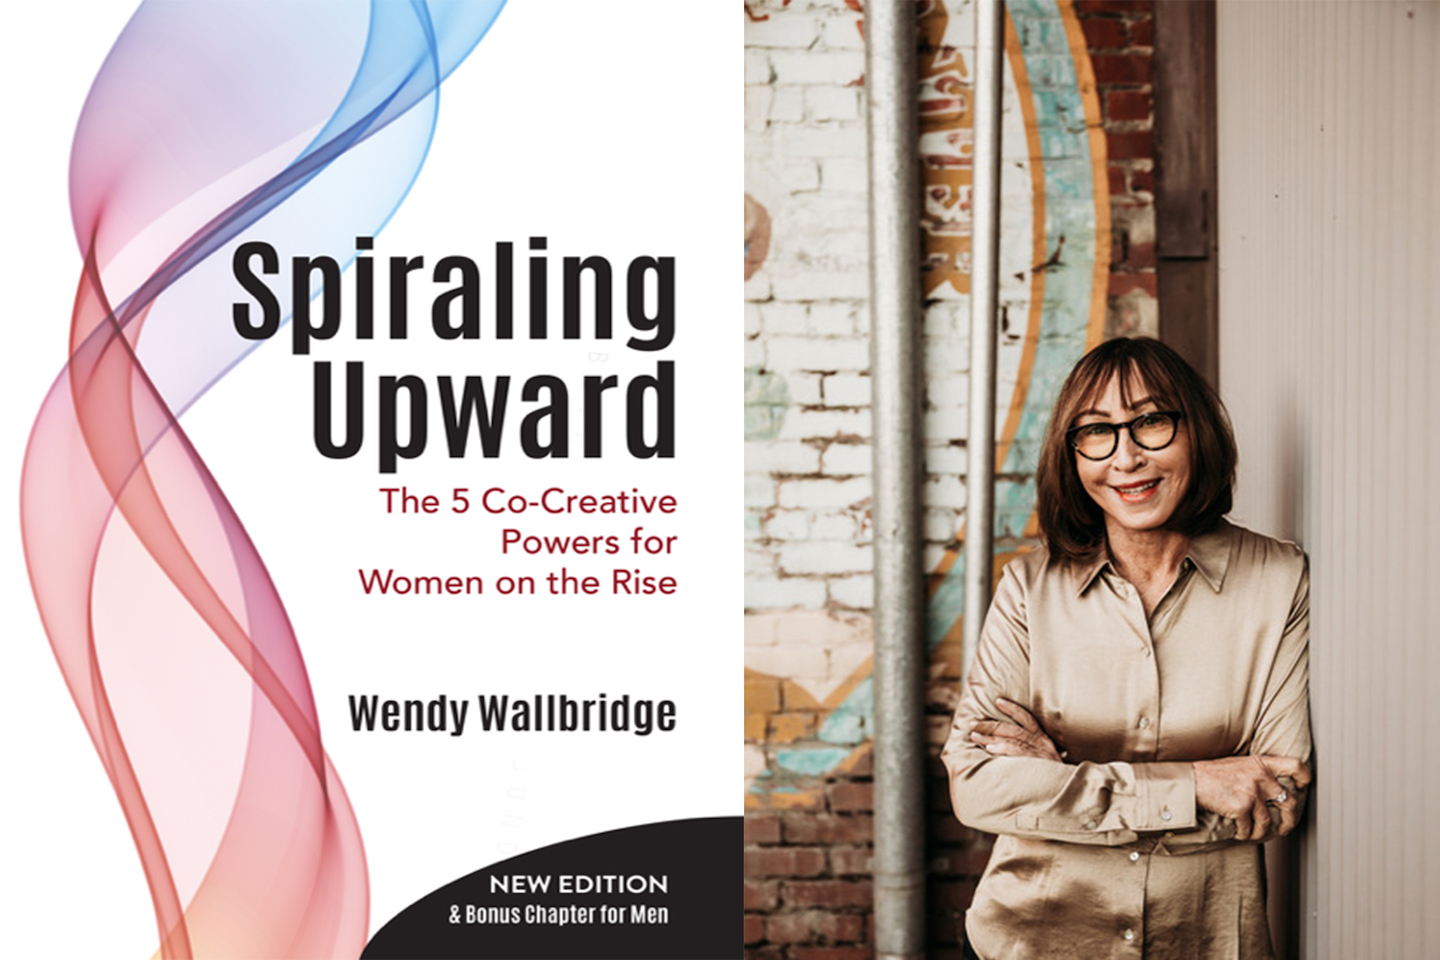 Event: An Evening with Wendy Wallbridge